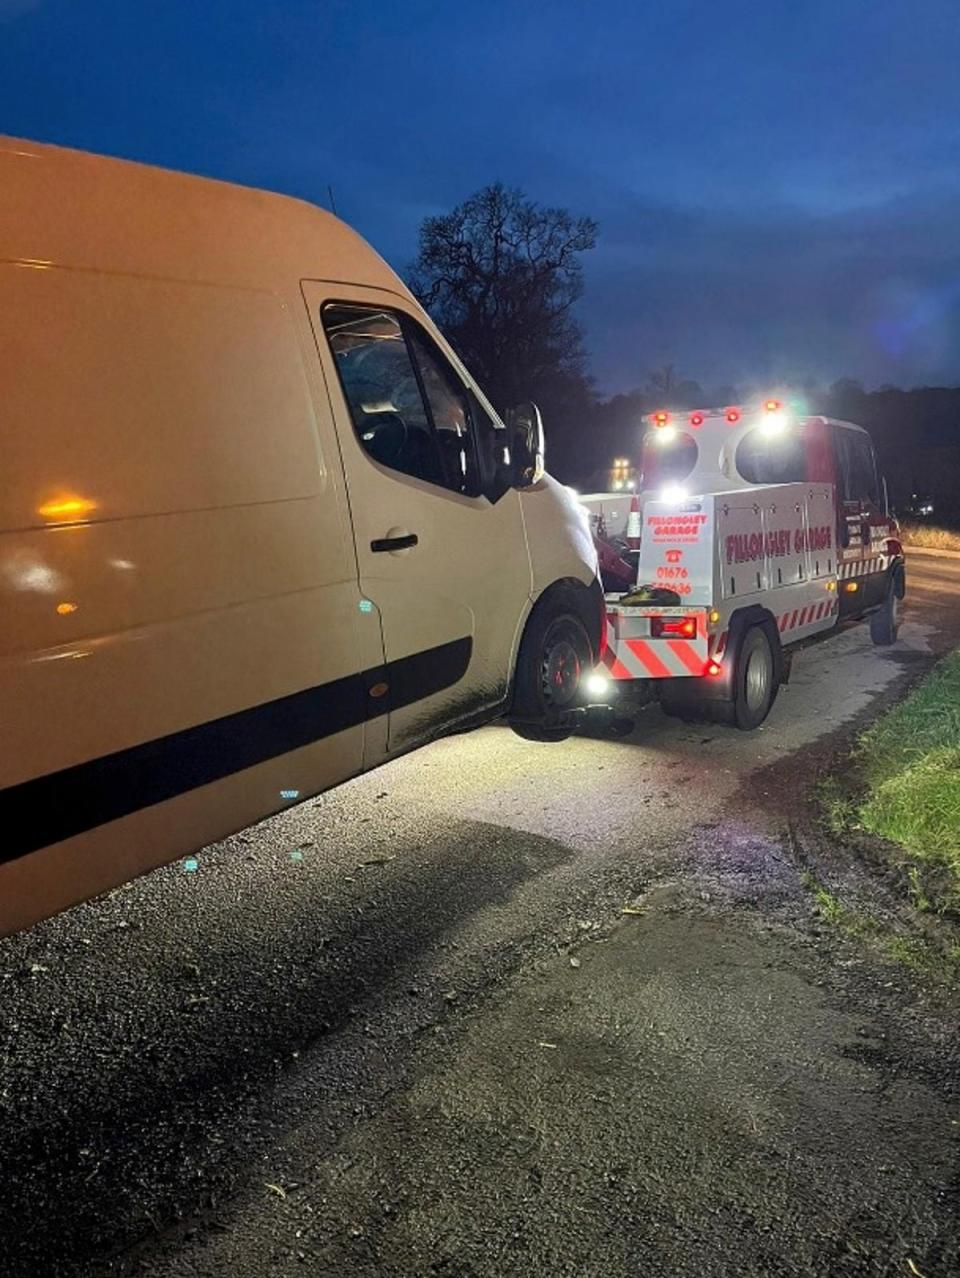 Police arrived and ordered the pair to reload their vans with the rubbish before seizing their vehicles (Warwickshire Police)